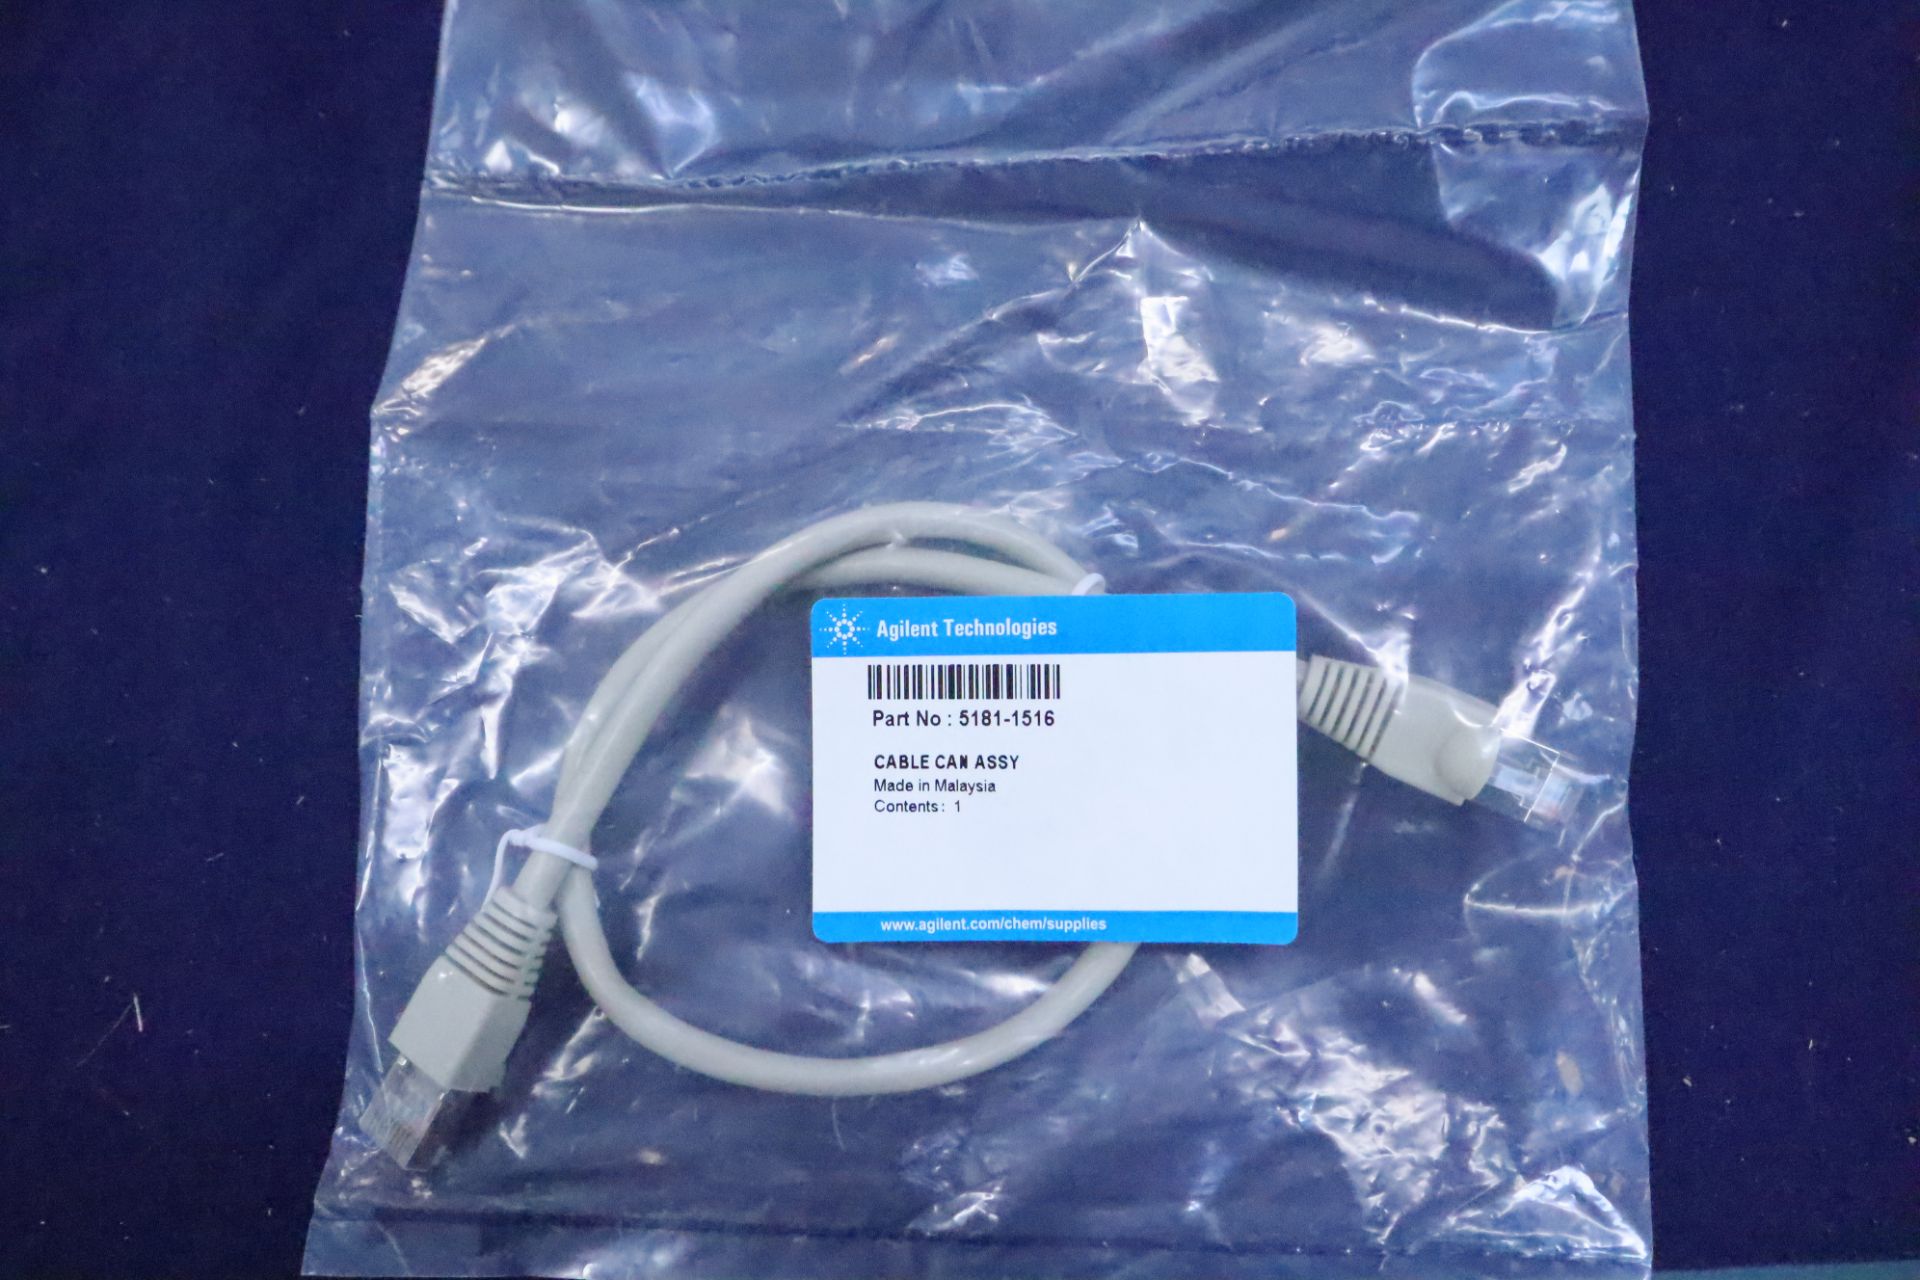 Agilent Technologies OEM Replacement Parts, Booklets and Recovery Drive - Image 32 of 32